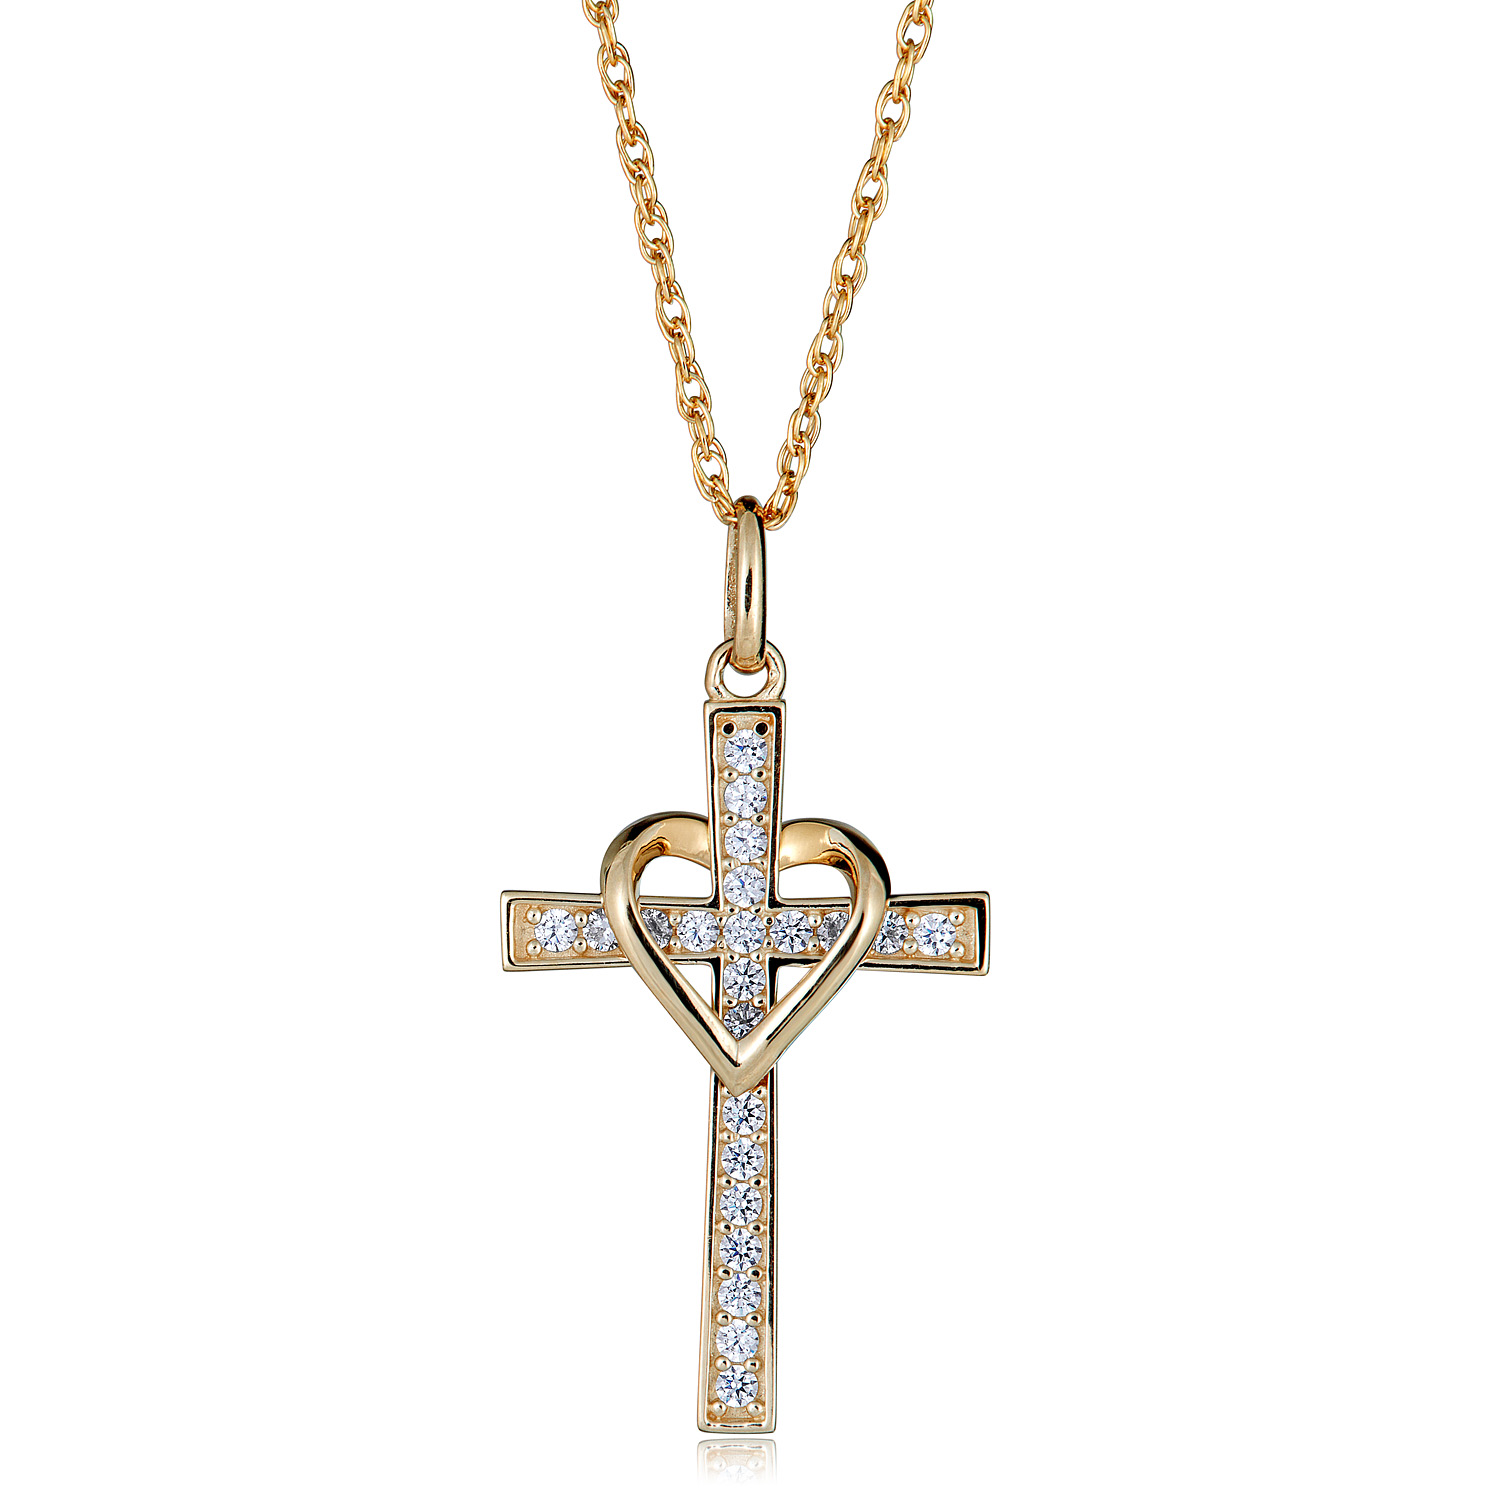 AVORA 10K Yellow Gold Simulated Diamond CZ Heart and Cross Pendant Necklace with 18" Chain